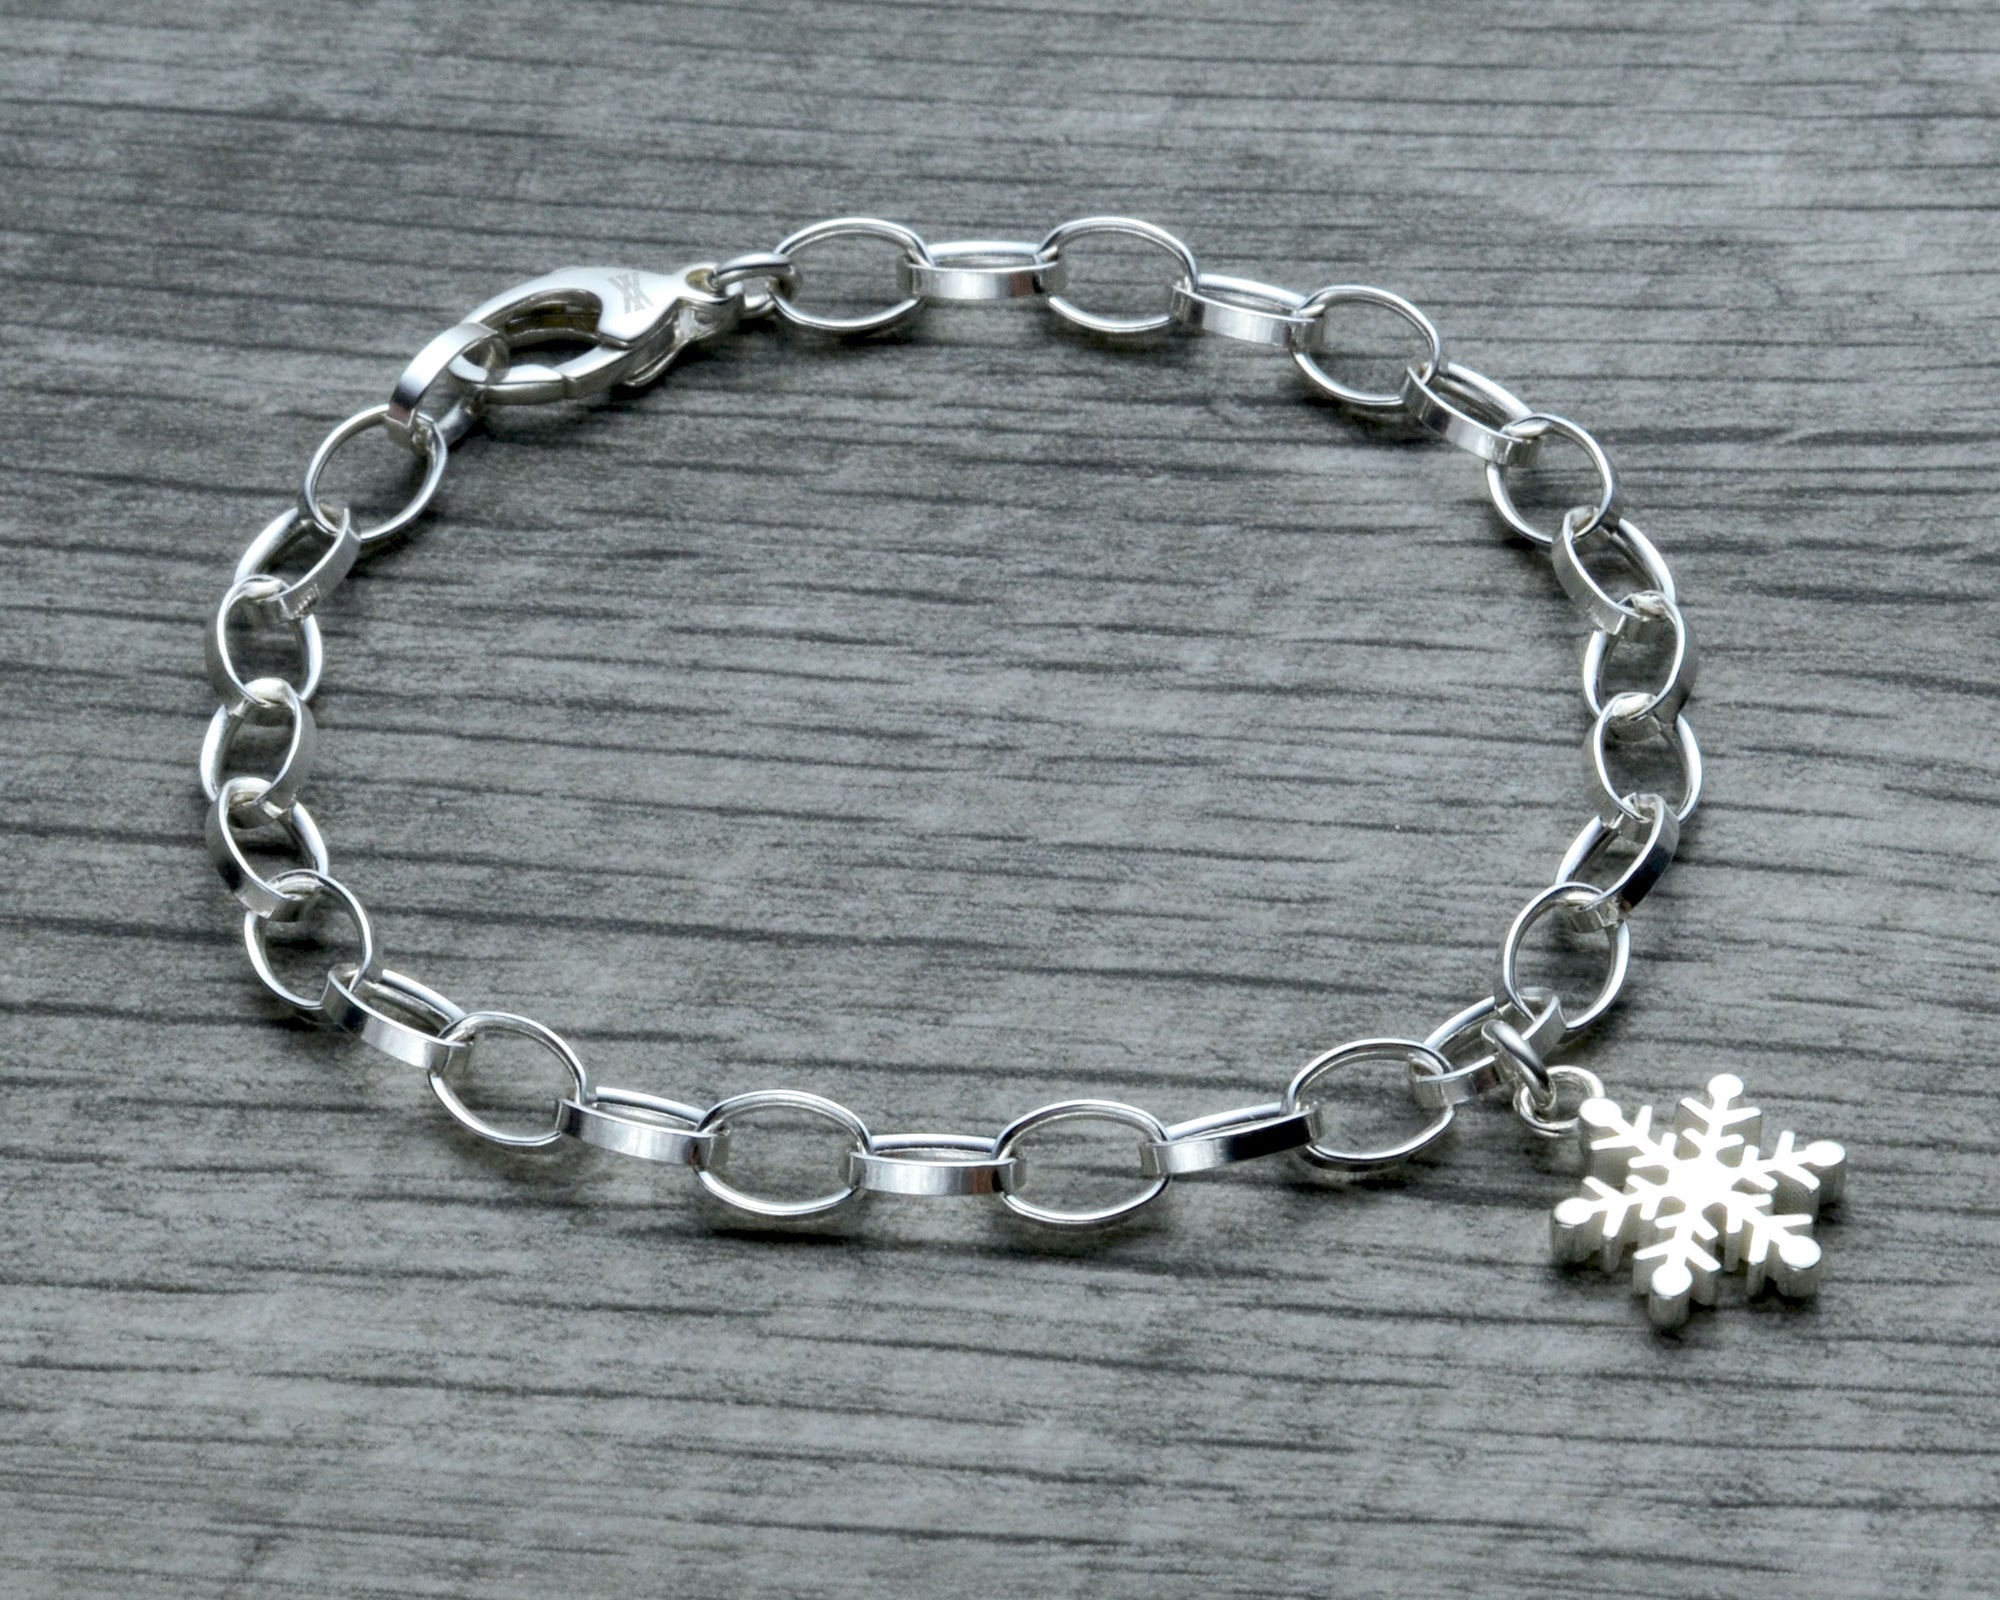 Snowflake charm bracelet in sterling silver with clasp